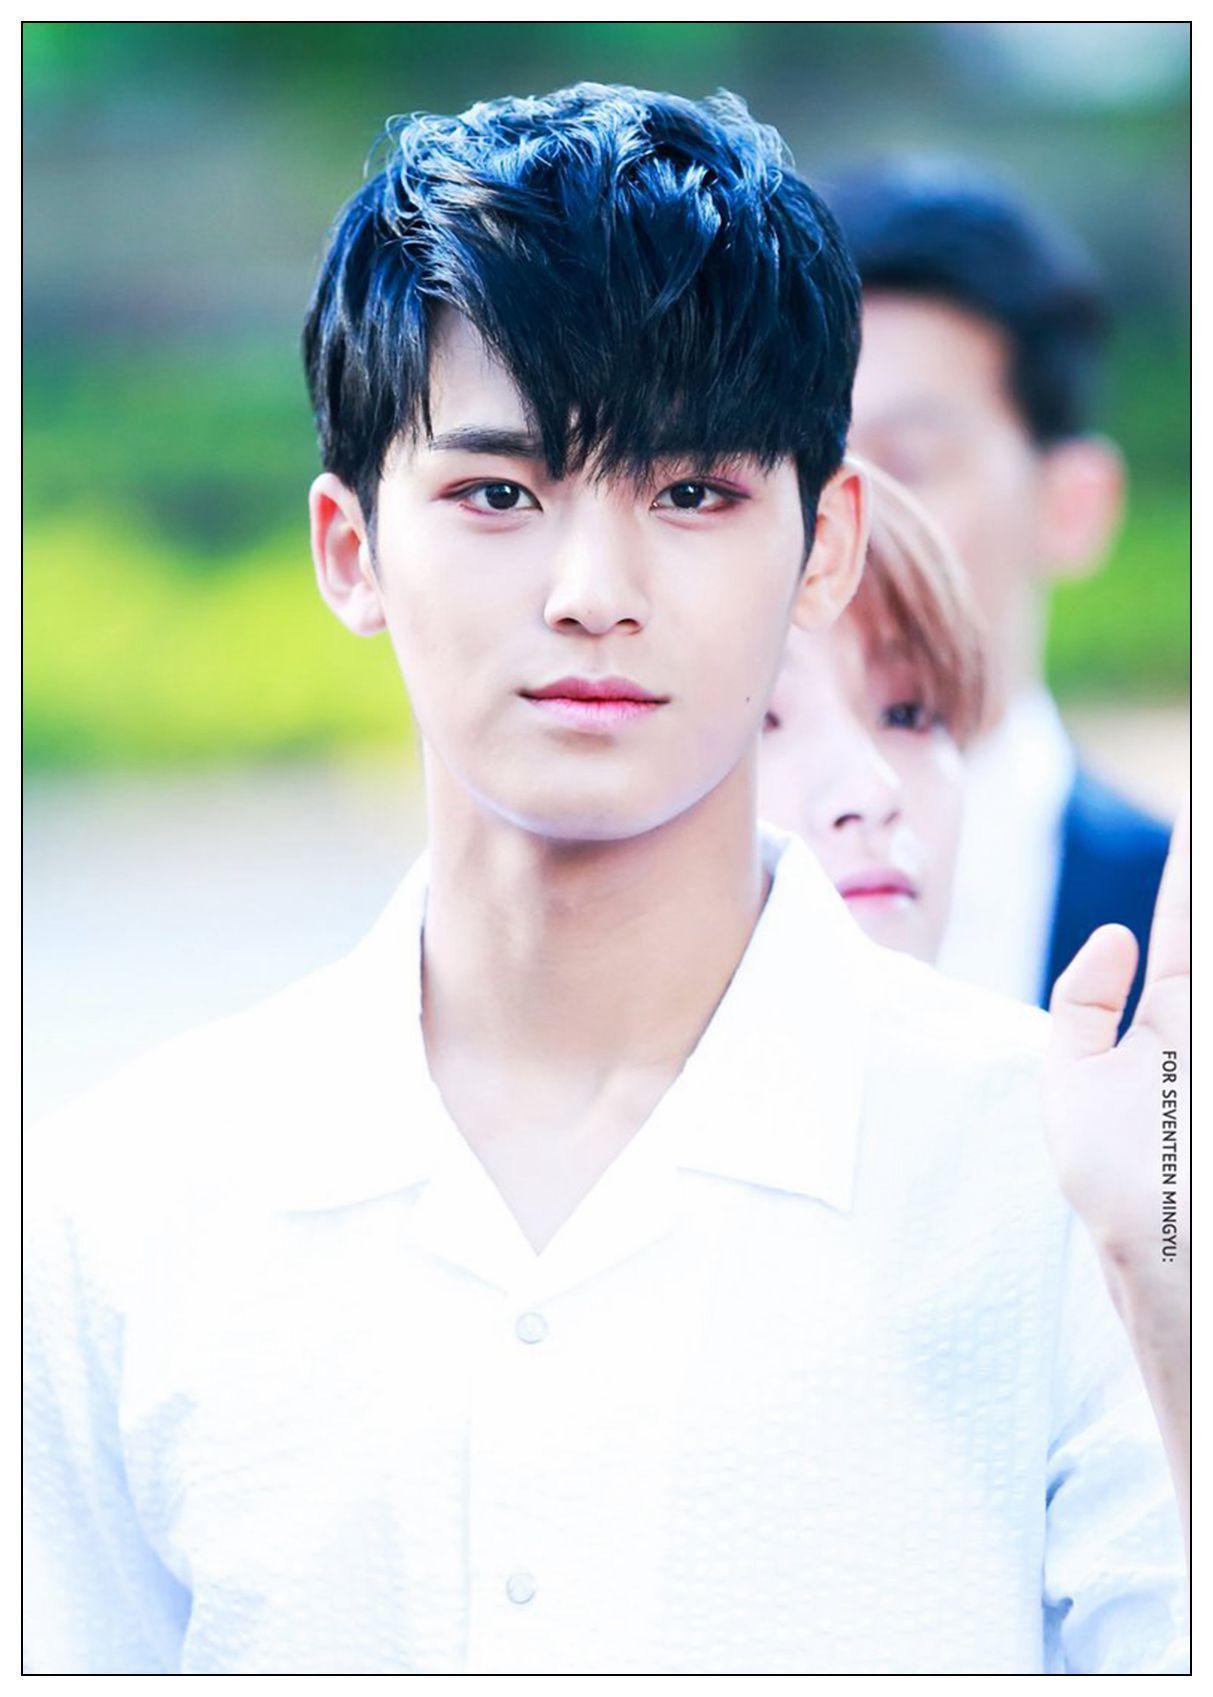 Seventeen Mingyu photo star Coated poster Painting Home Room Decor